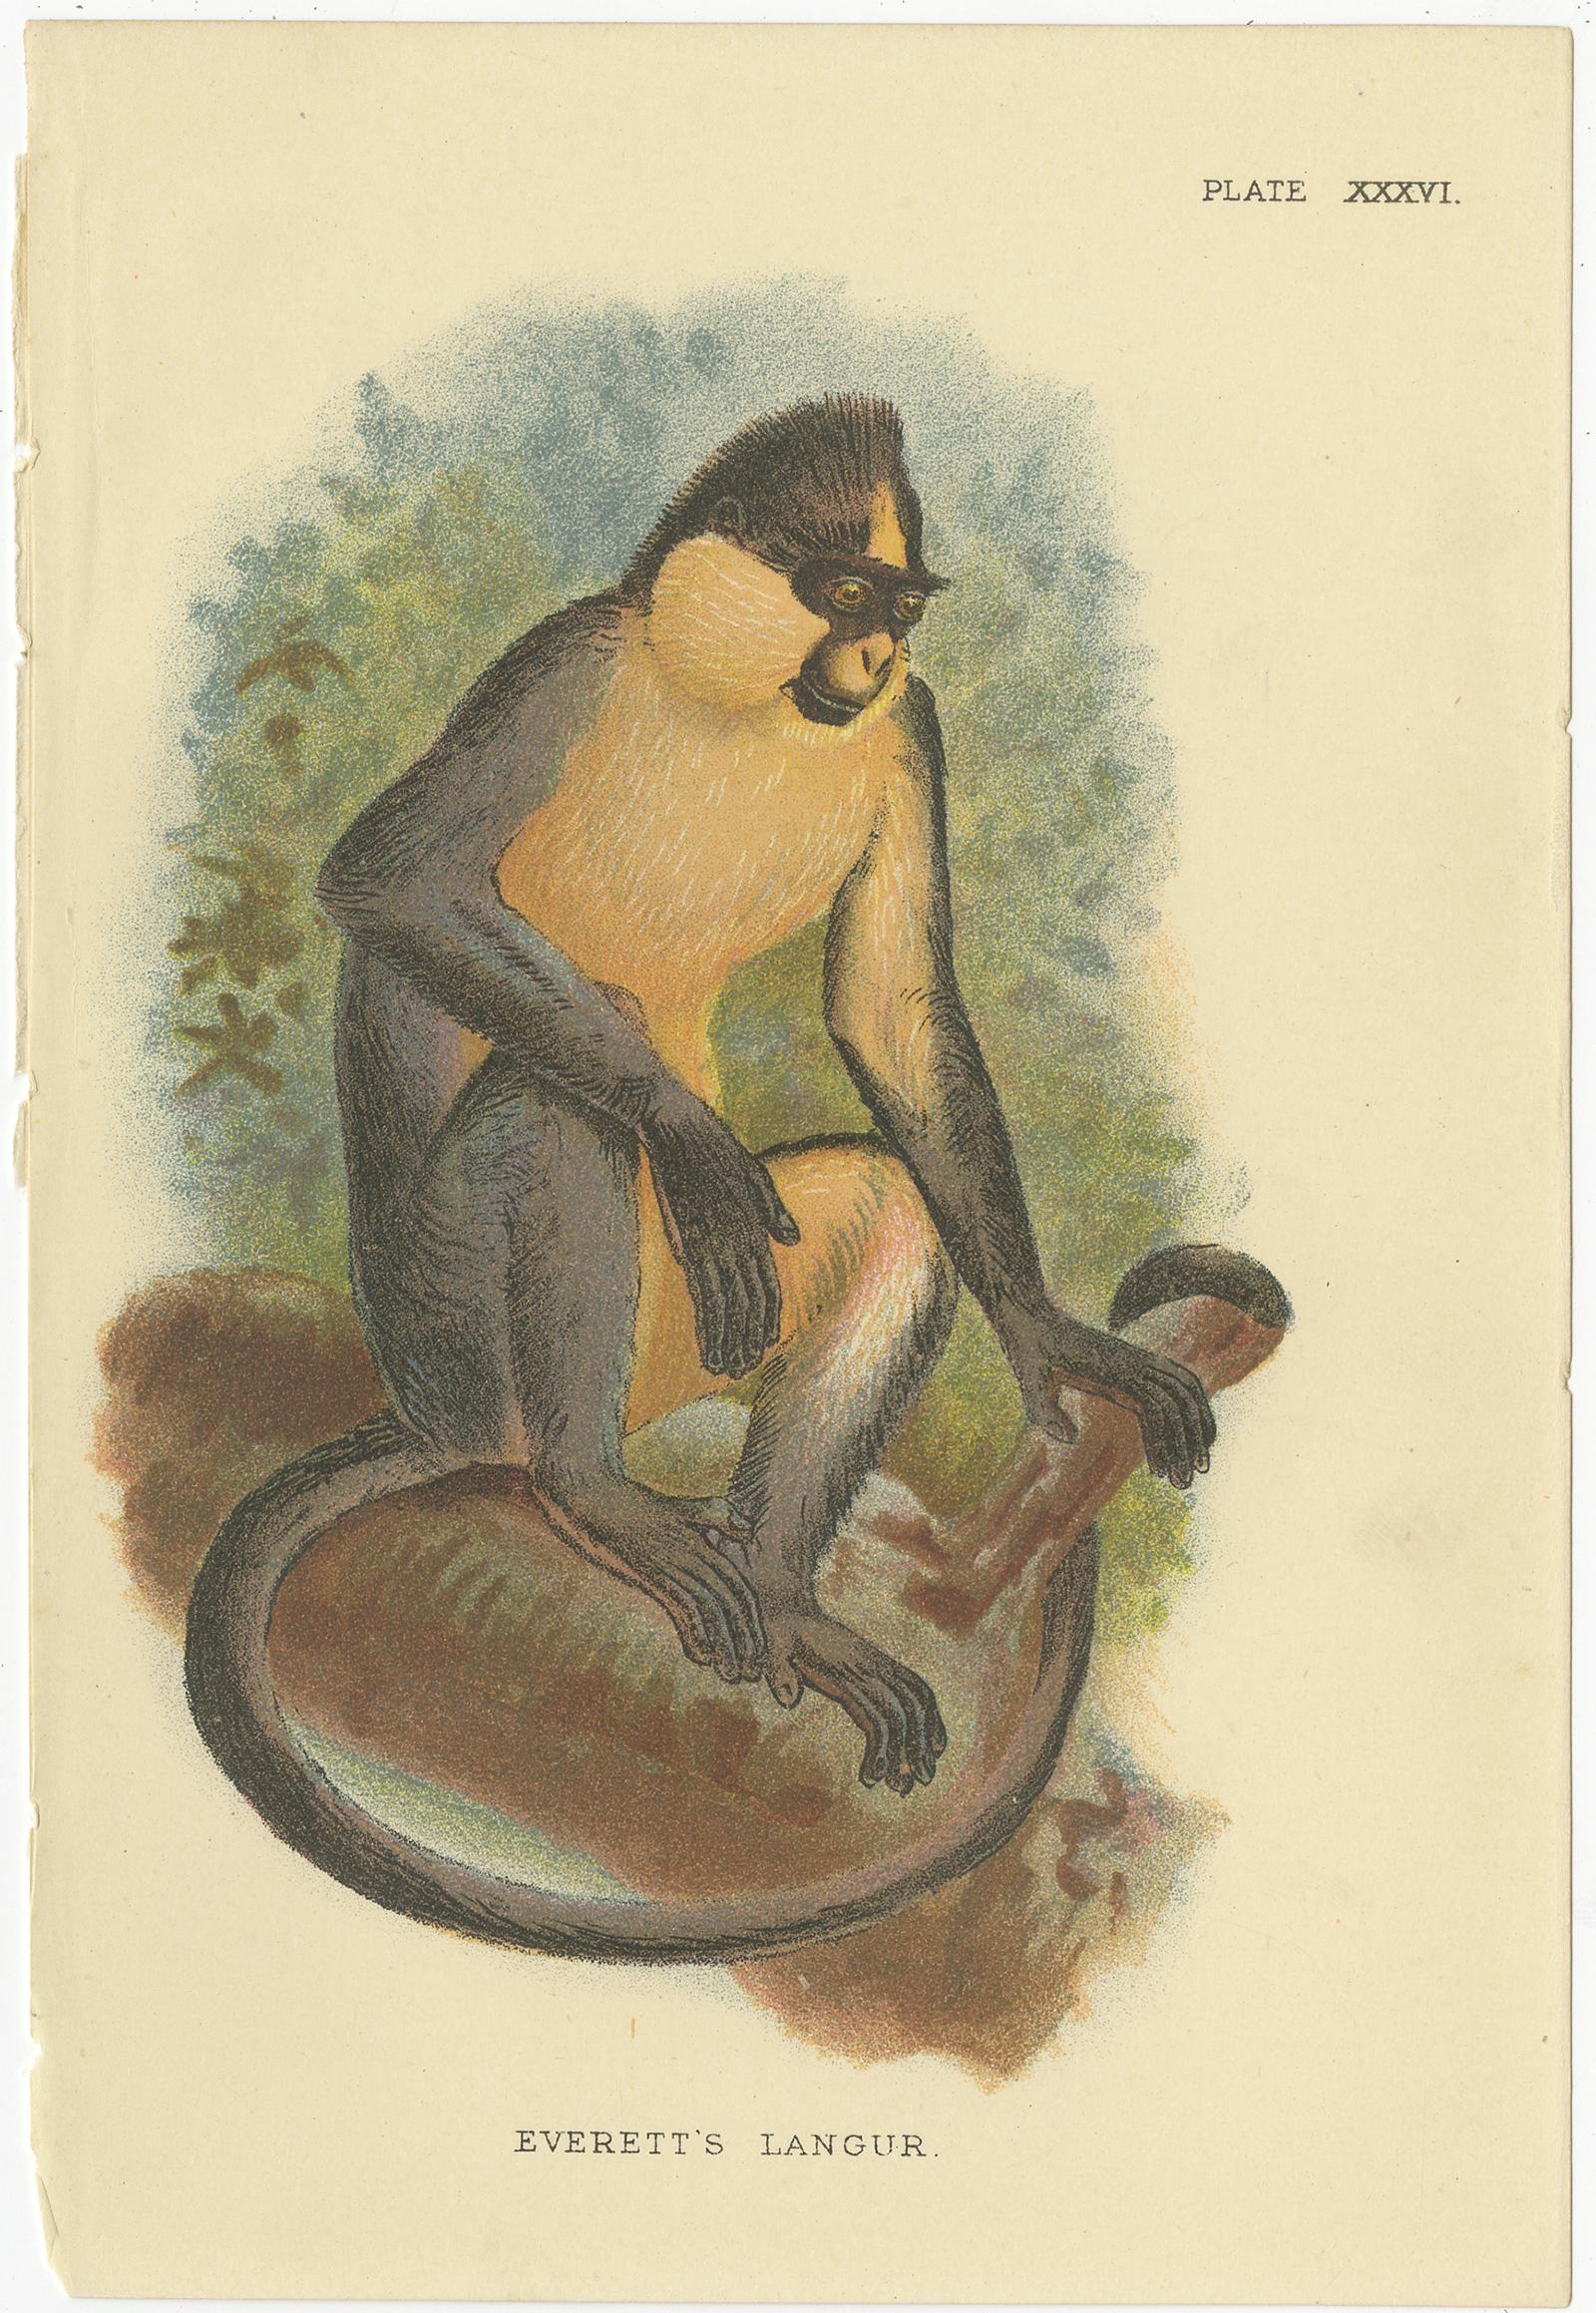 Set of two antique prints titled 'Everett's Langur - Hose's Langur'. Chromolithograph of langur monkey species. These prints originate from 'Lloyds's Natural History (..)', by Edward Lloyd, published 1894-1897.